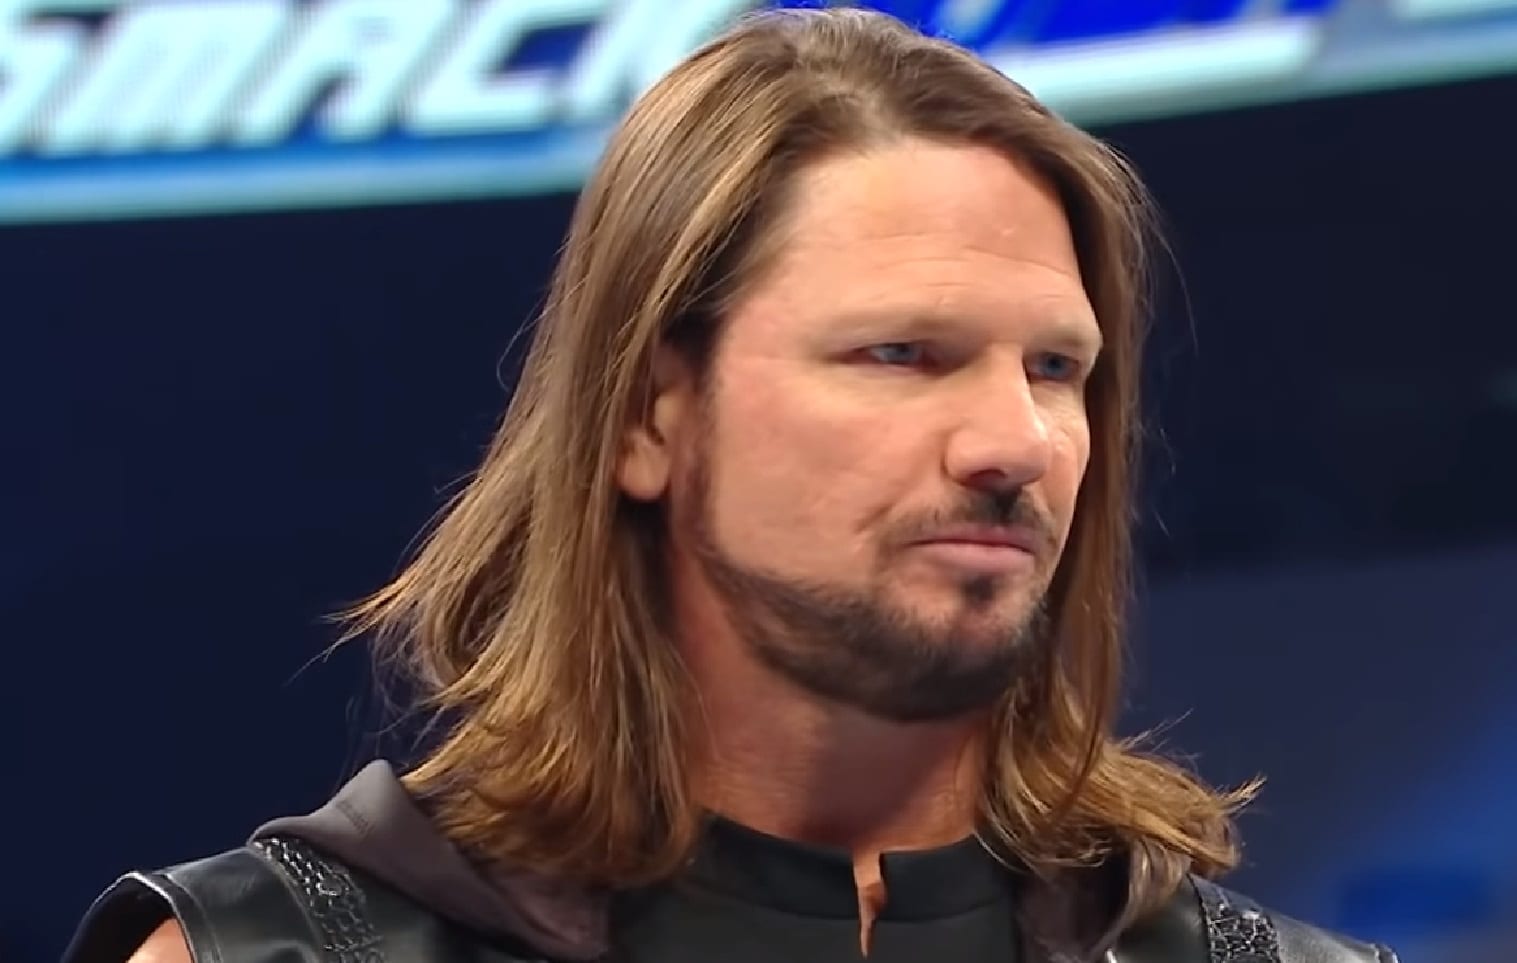 AJ Styles' Likely Future With WWE After Contract Expires